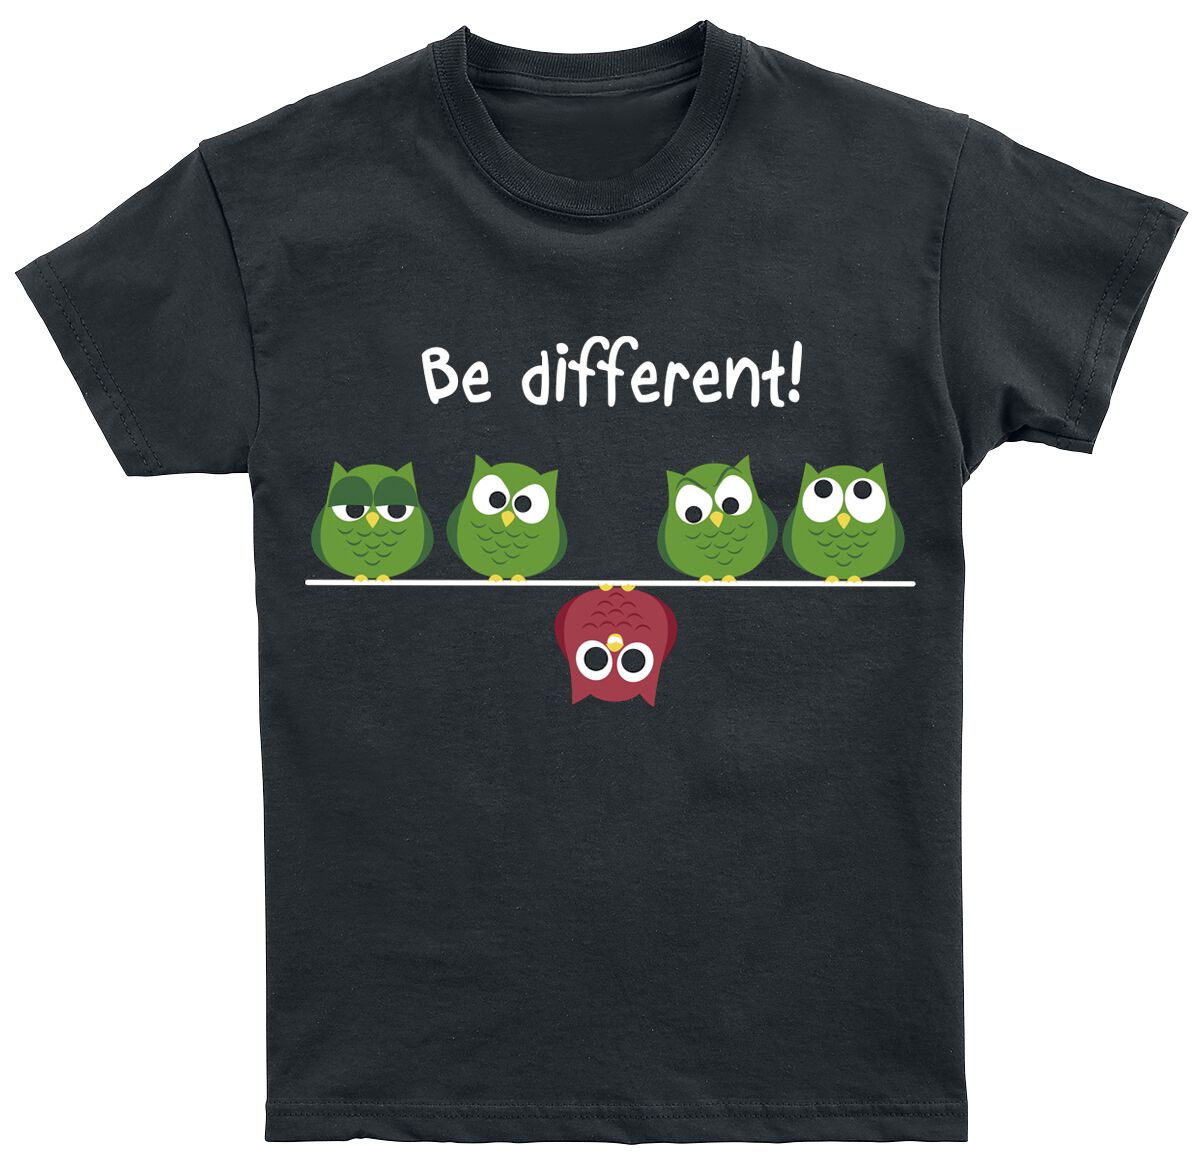 Be Different! Kids - Be Different! T-Shirt black